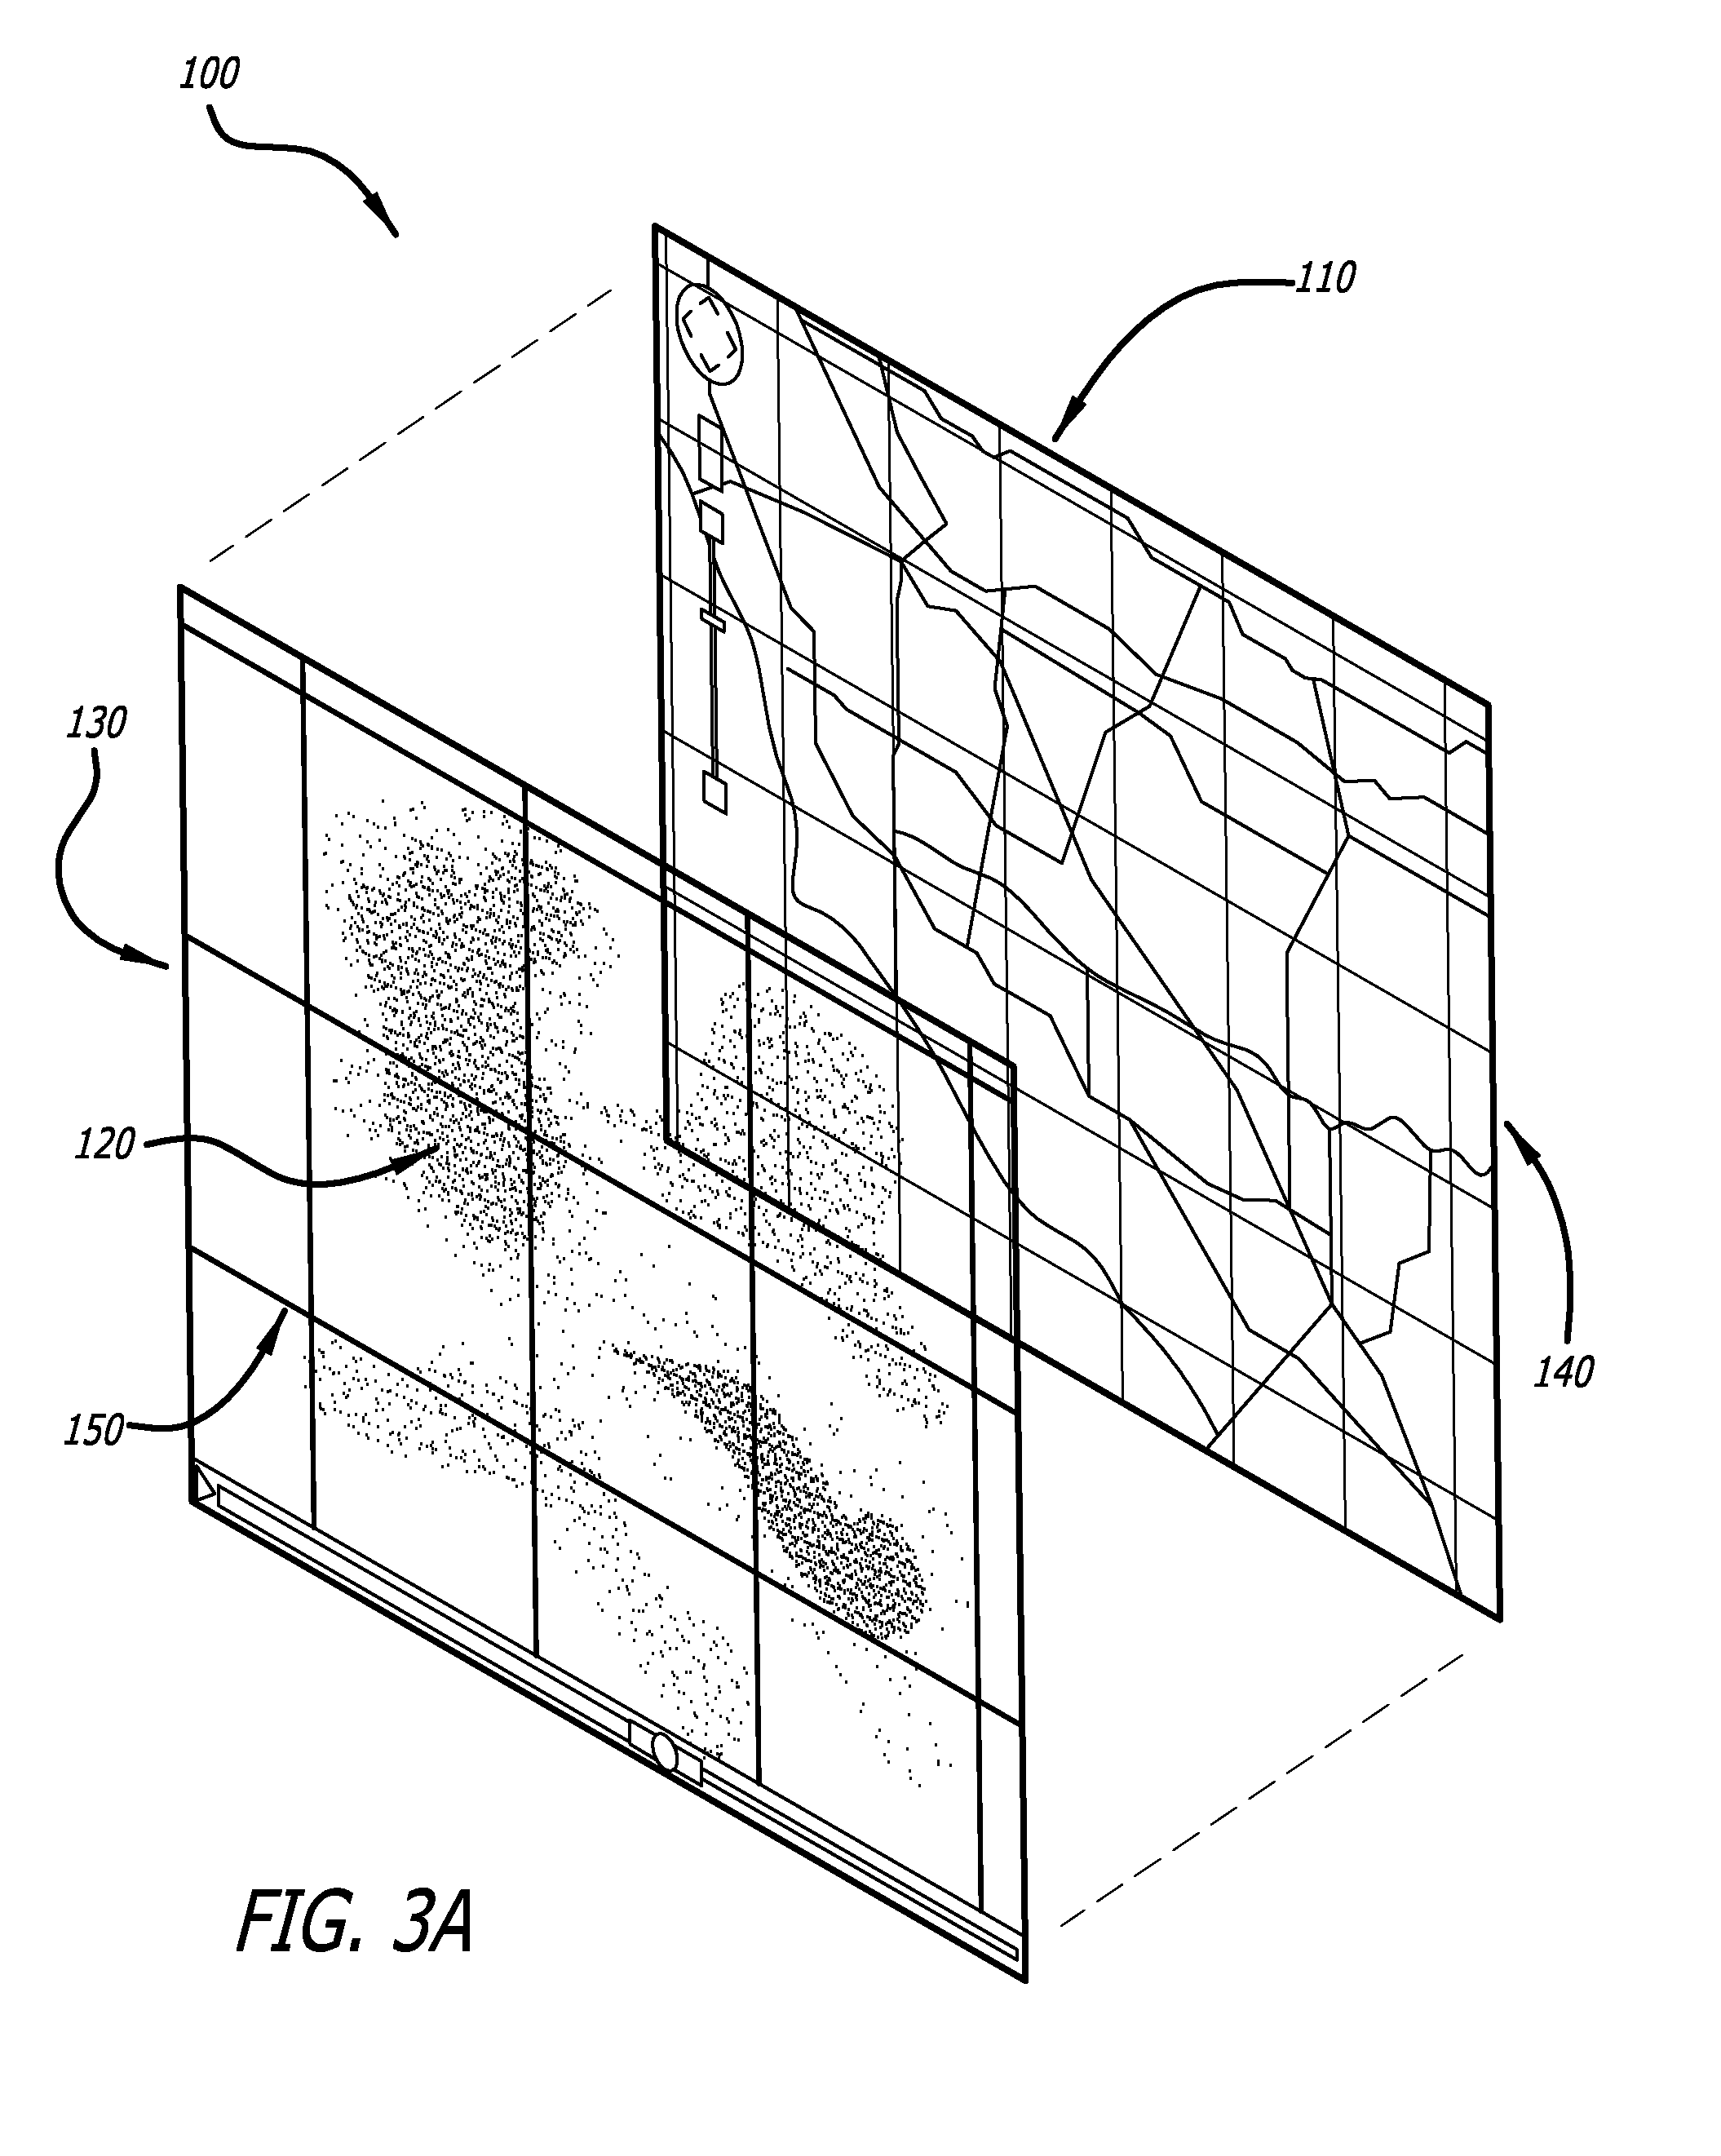 Data overlay for animated map weather display and method of rapidly loading animated raster data